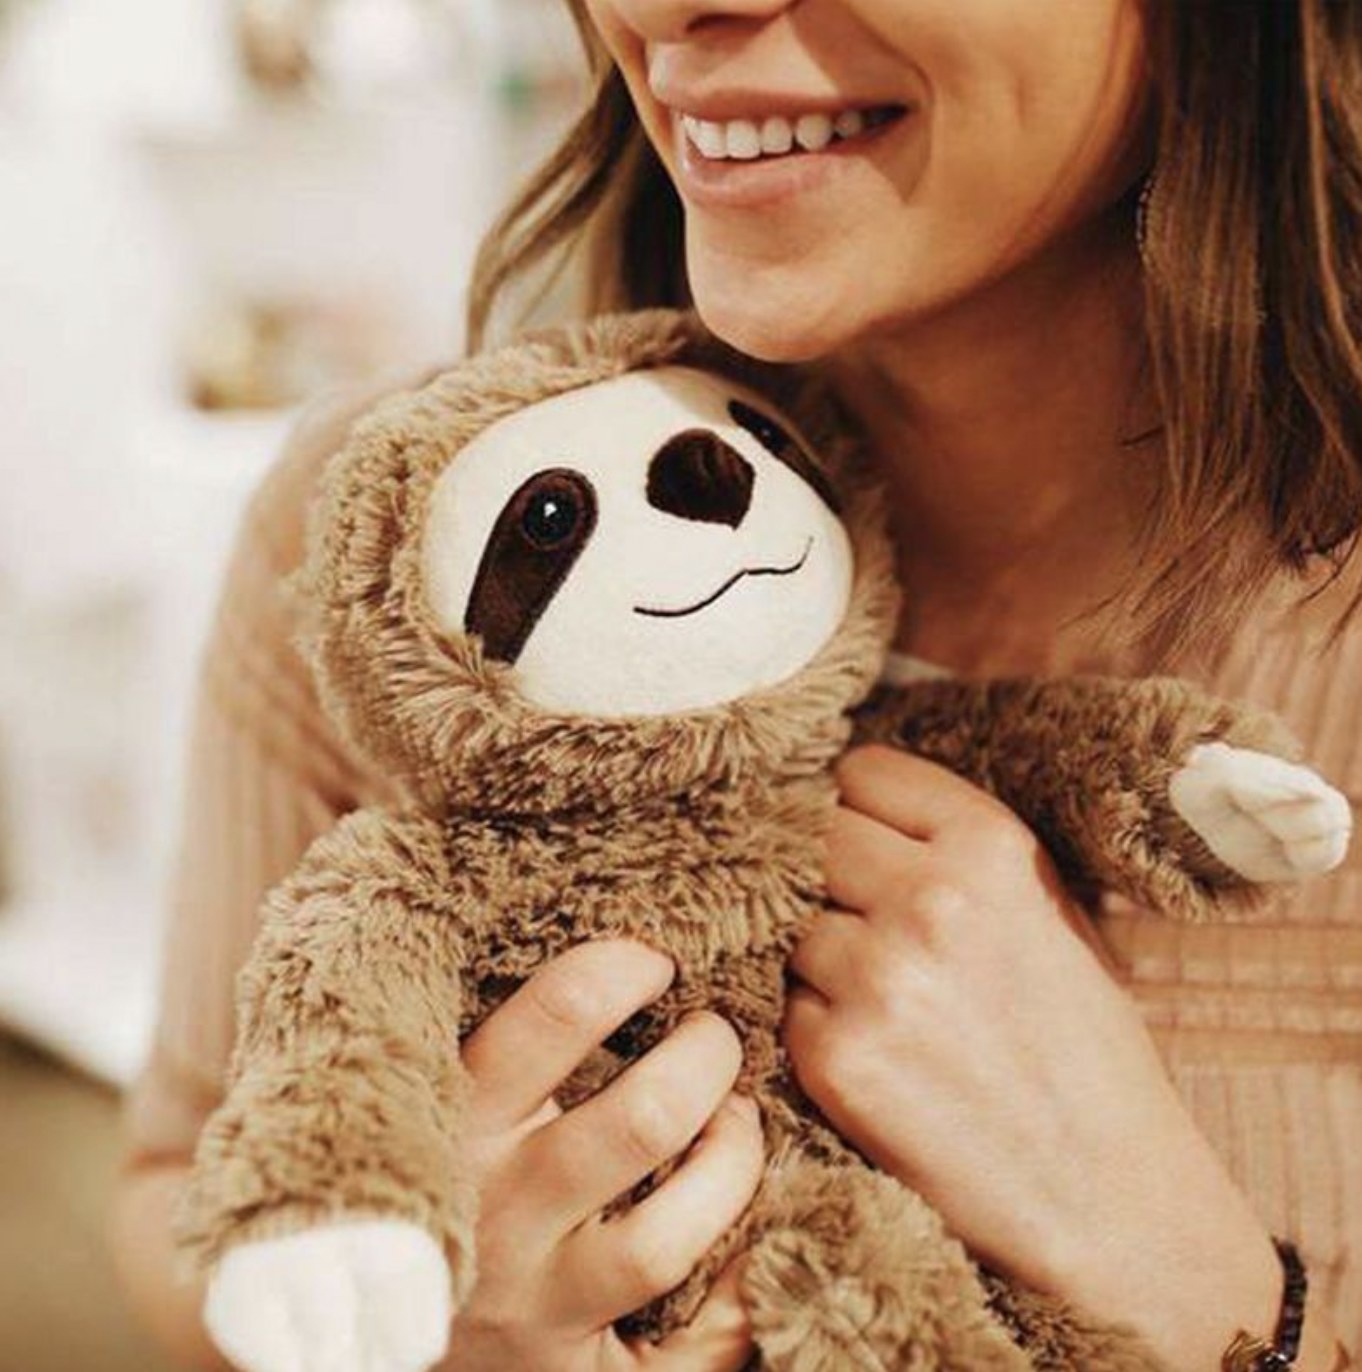 Someone holding the sloth close to her chest